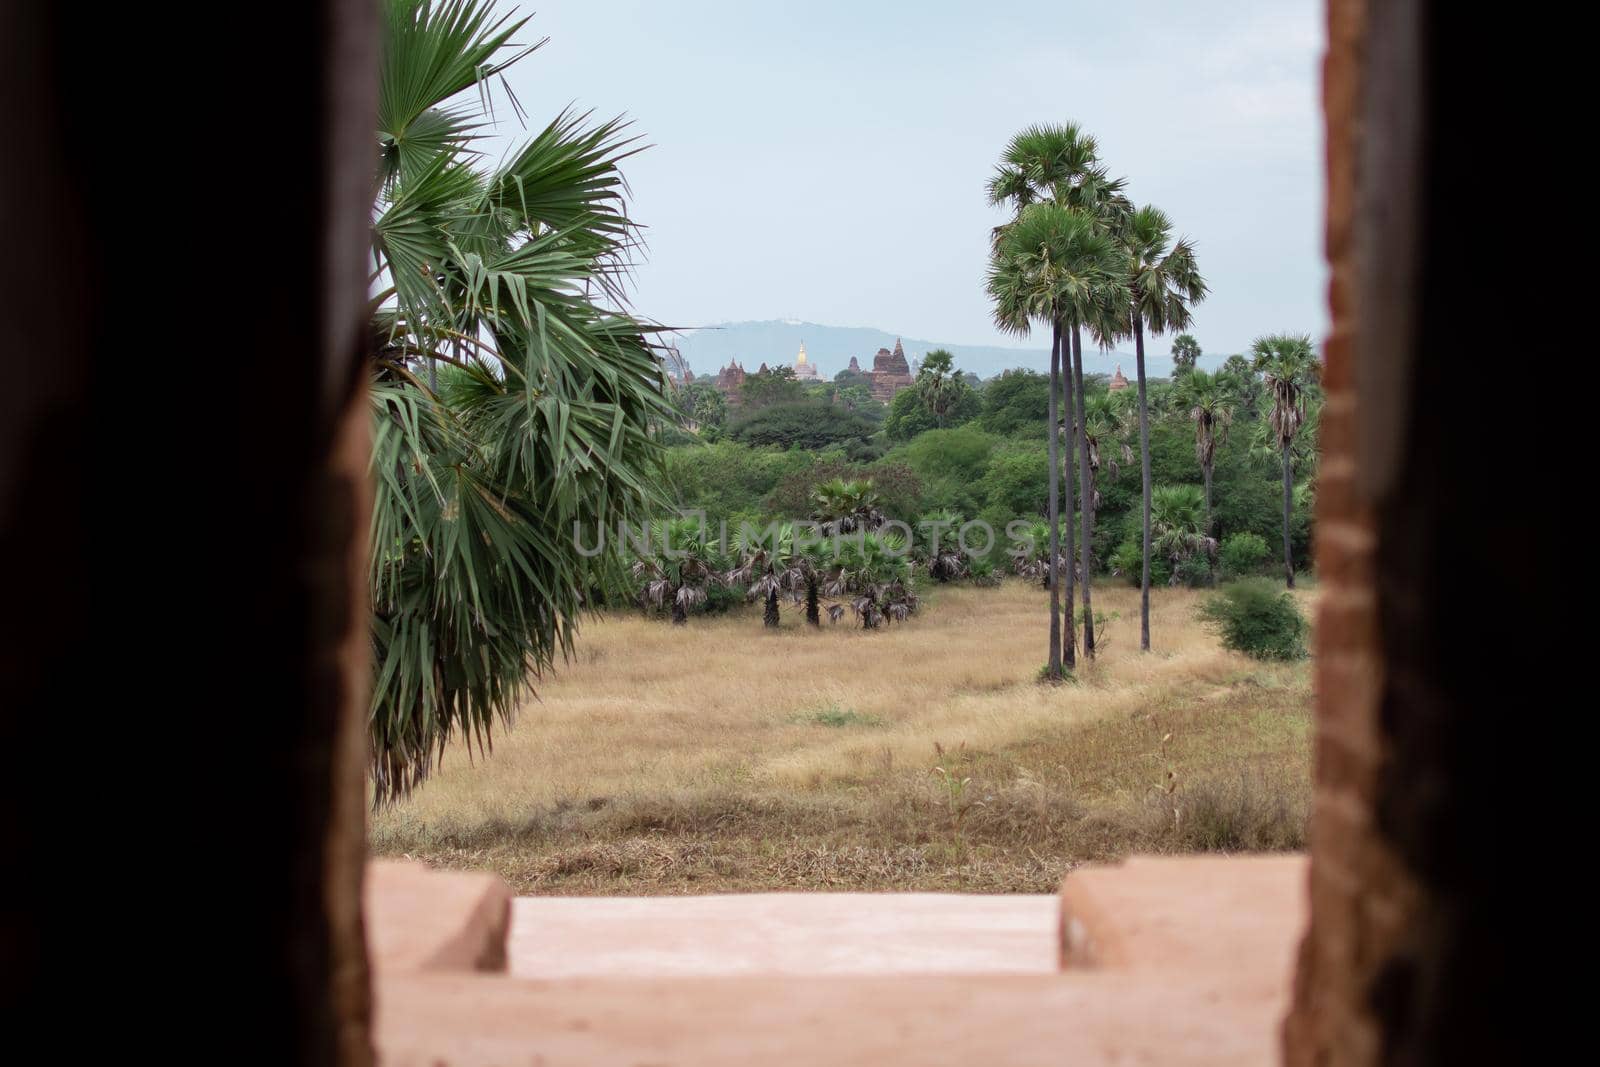 BAGAN, NYAUNG-U, MYANMAR - 2 JANUARY 2020: View from inside a pagoda over a few historical temples, a field and a forest